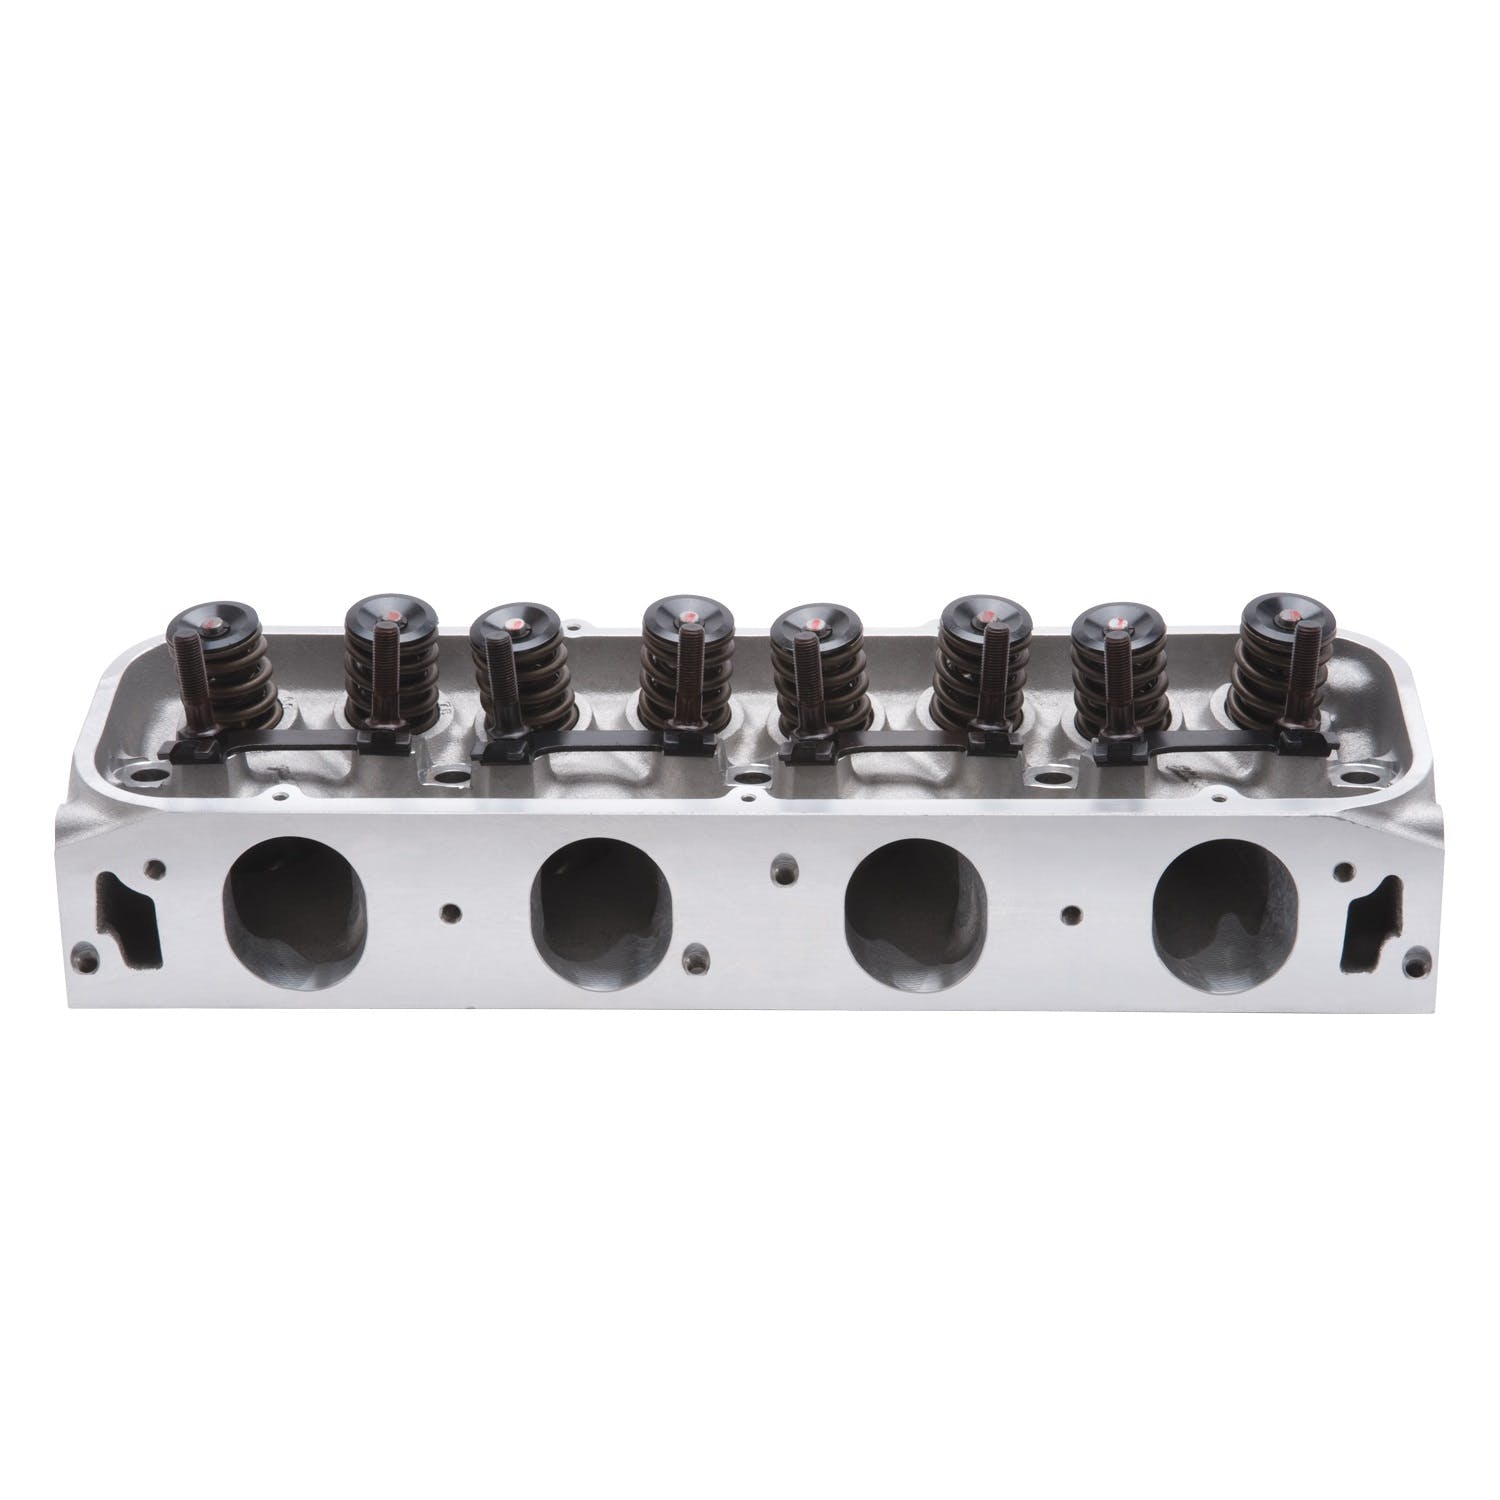 Edelbrock 61645 CYL HEAD BB FORD PERF RPM 460 CJ FOR HYD ROLLER CAM COMPLETE